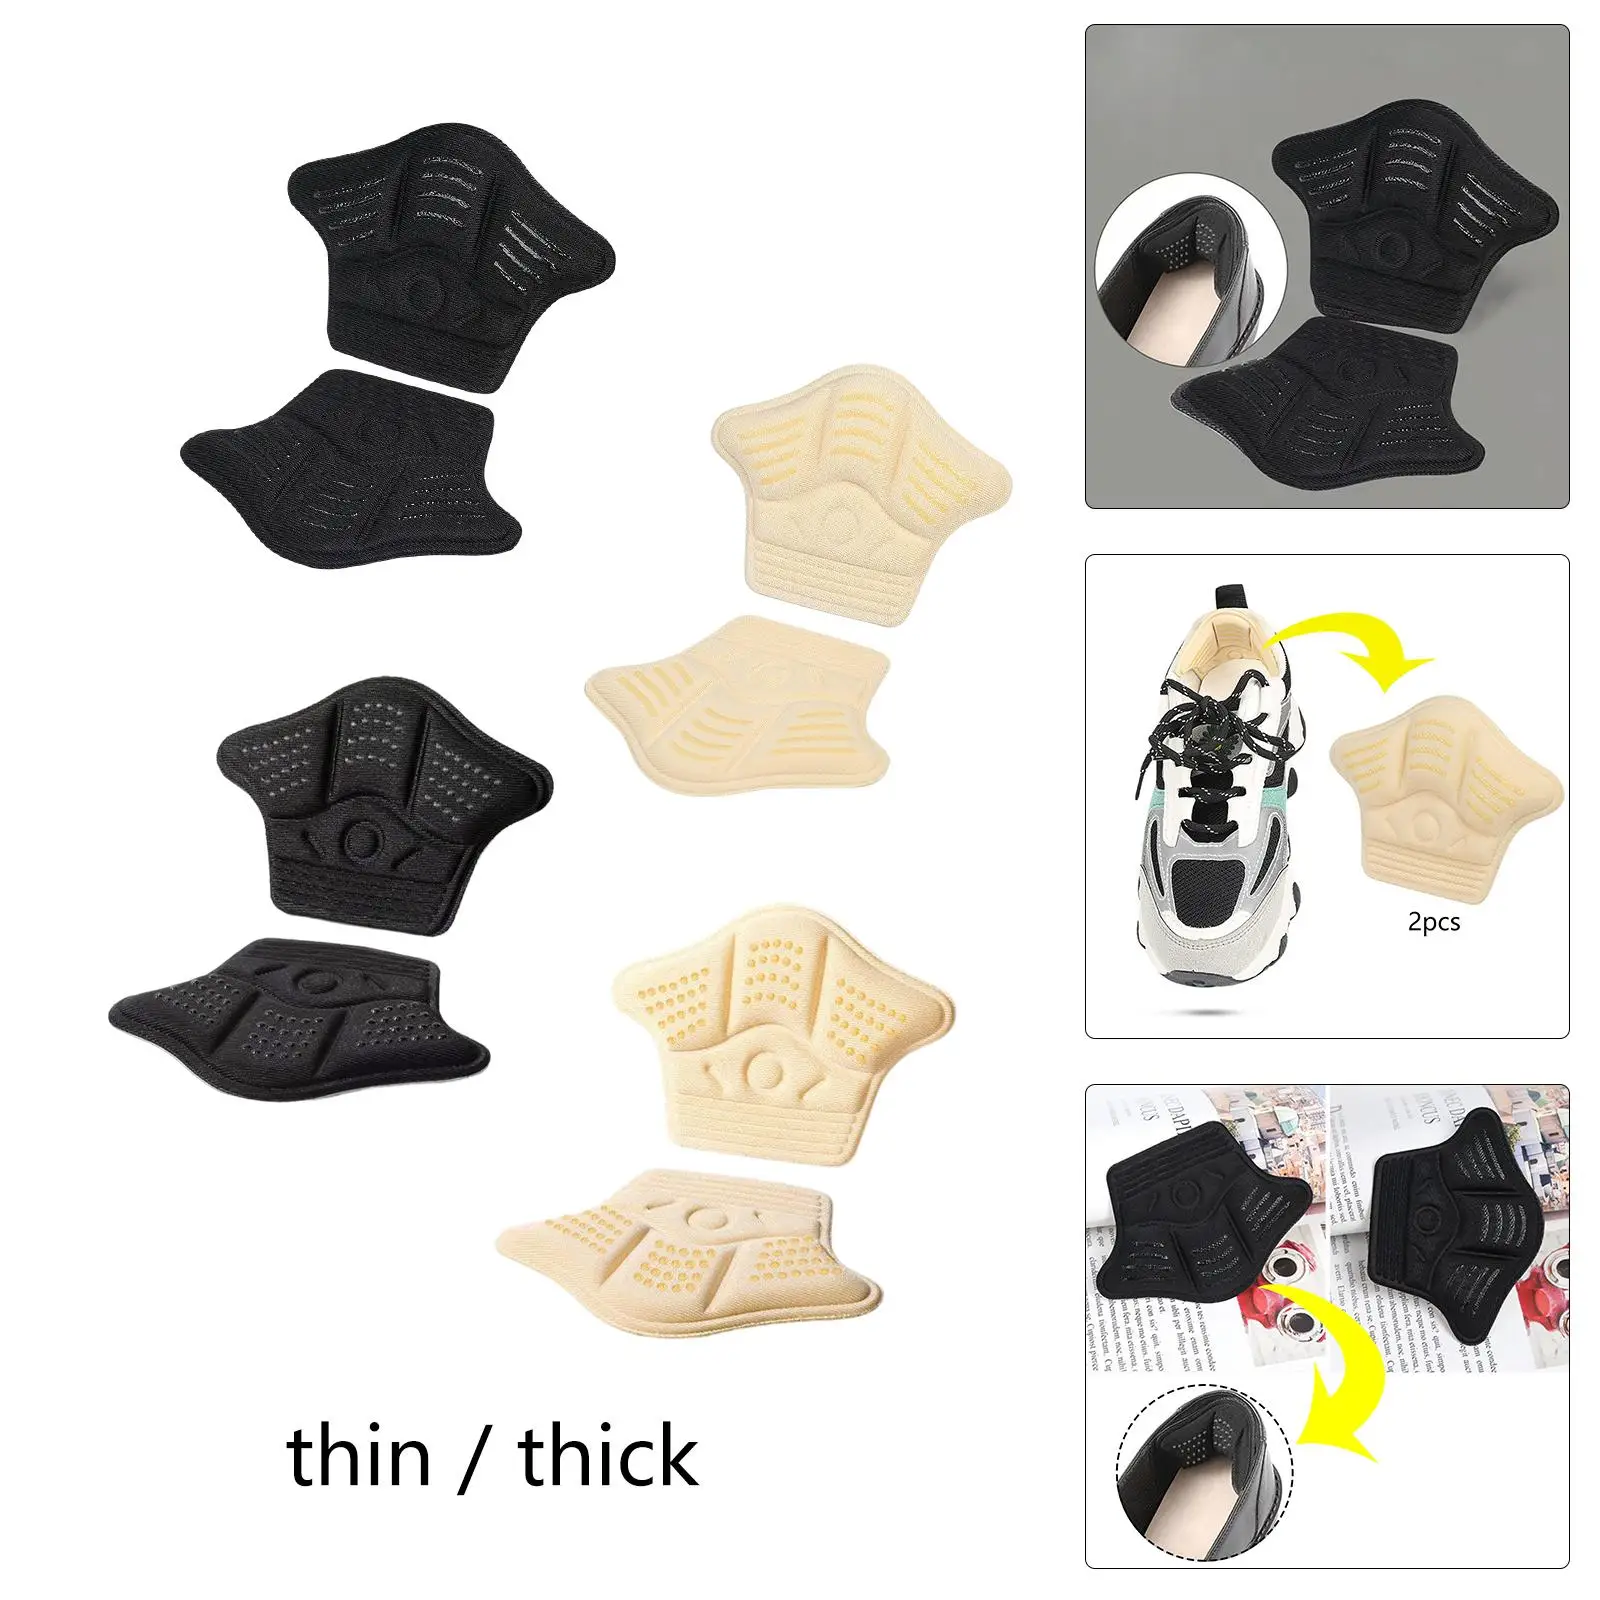 2 Pieces Shoes Heel Protectors Self Adhesive Shock Absorbing for Hiking Kids